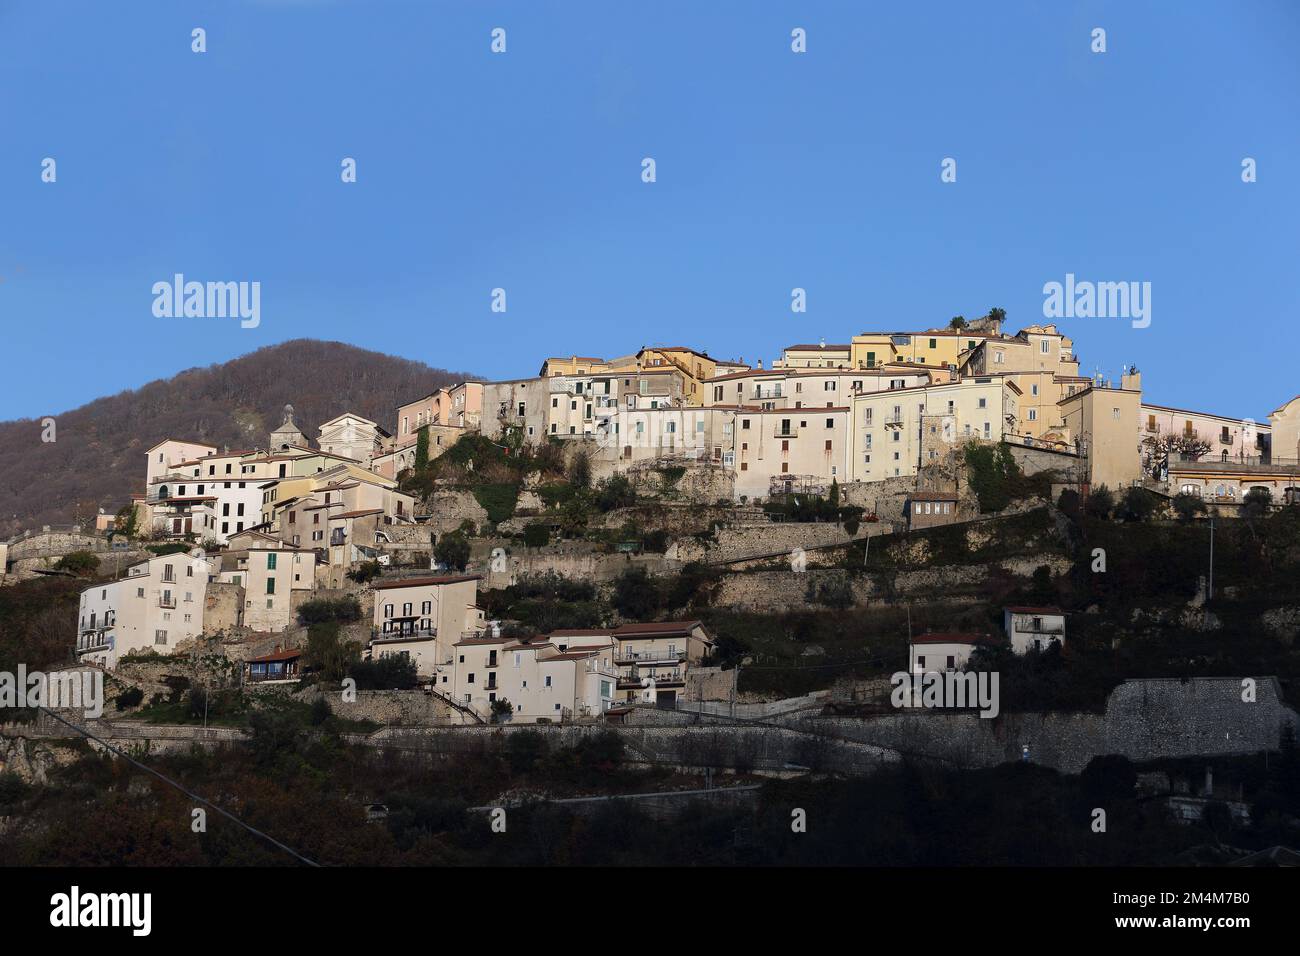 Picinisco, Italy - December 21, 2022: View of the town in the province of Frosinone Stock Photo